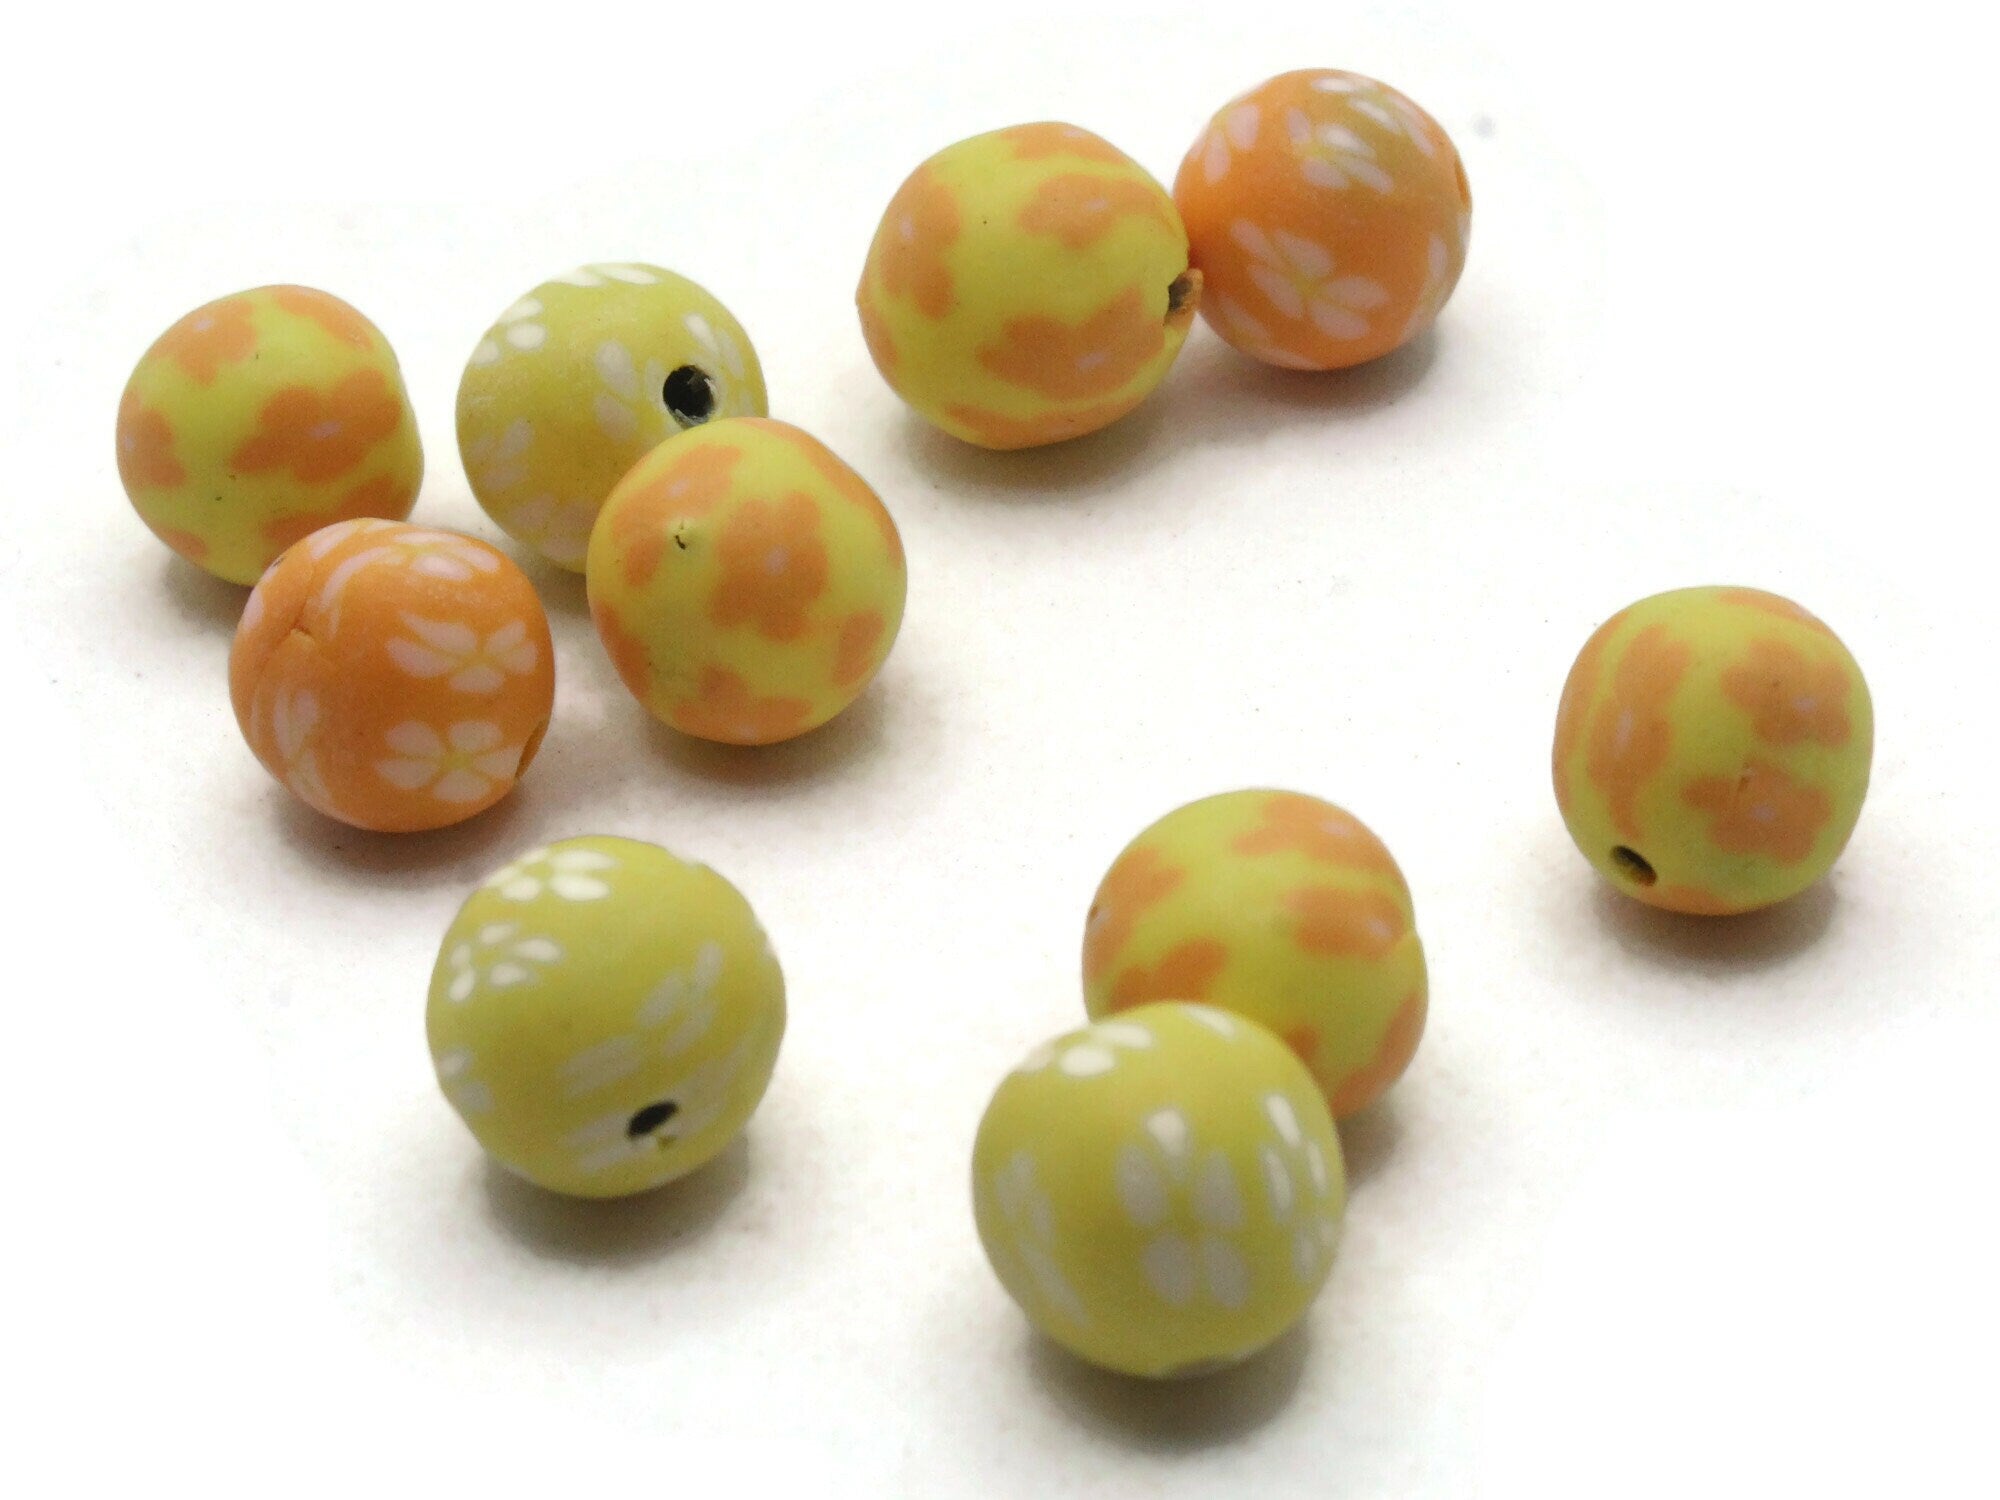 Bulk Beads Polymer Clay Beads 10mm Flower Beads 10mm Beads Assorted Beads  Wholesale Beads 100 Pieces 